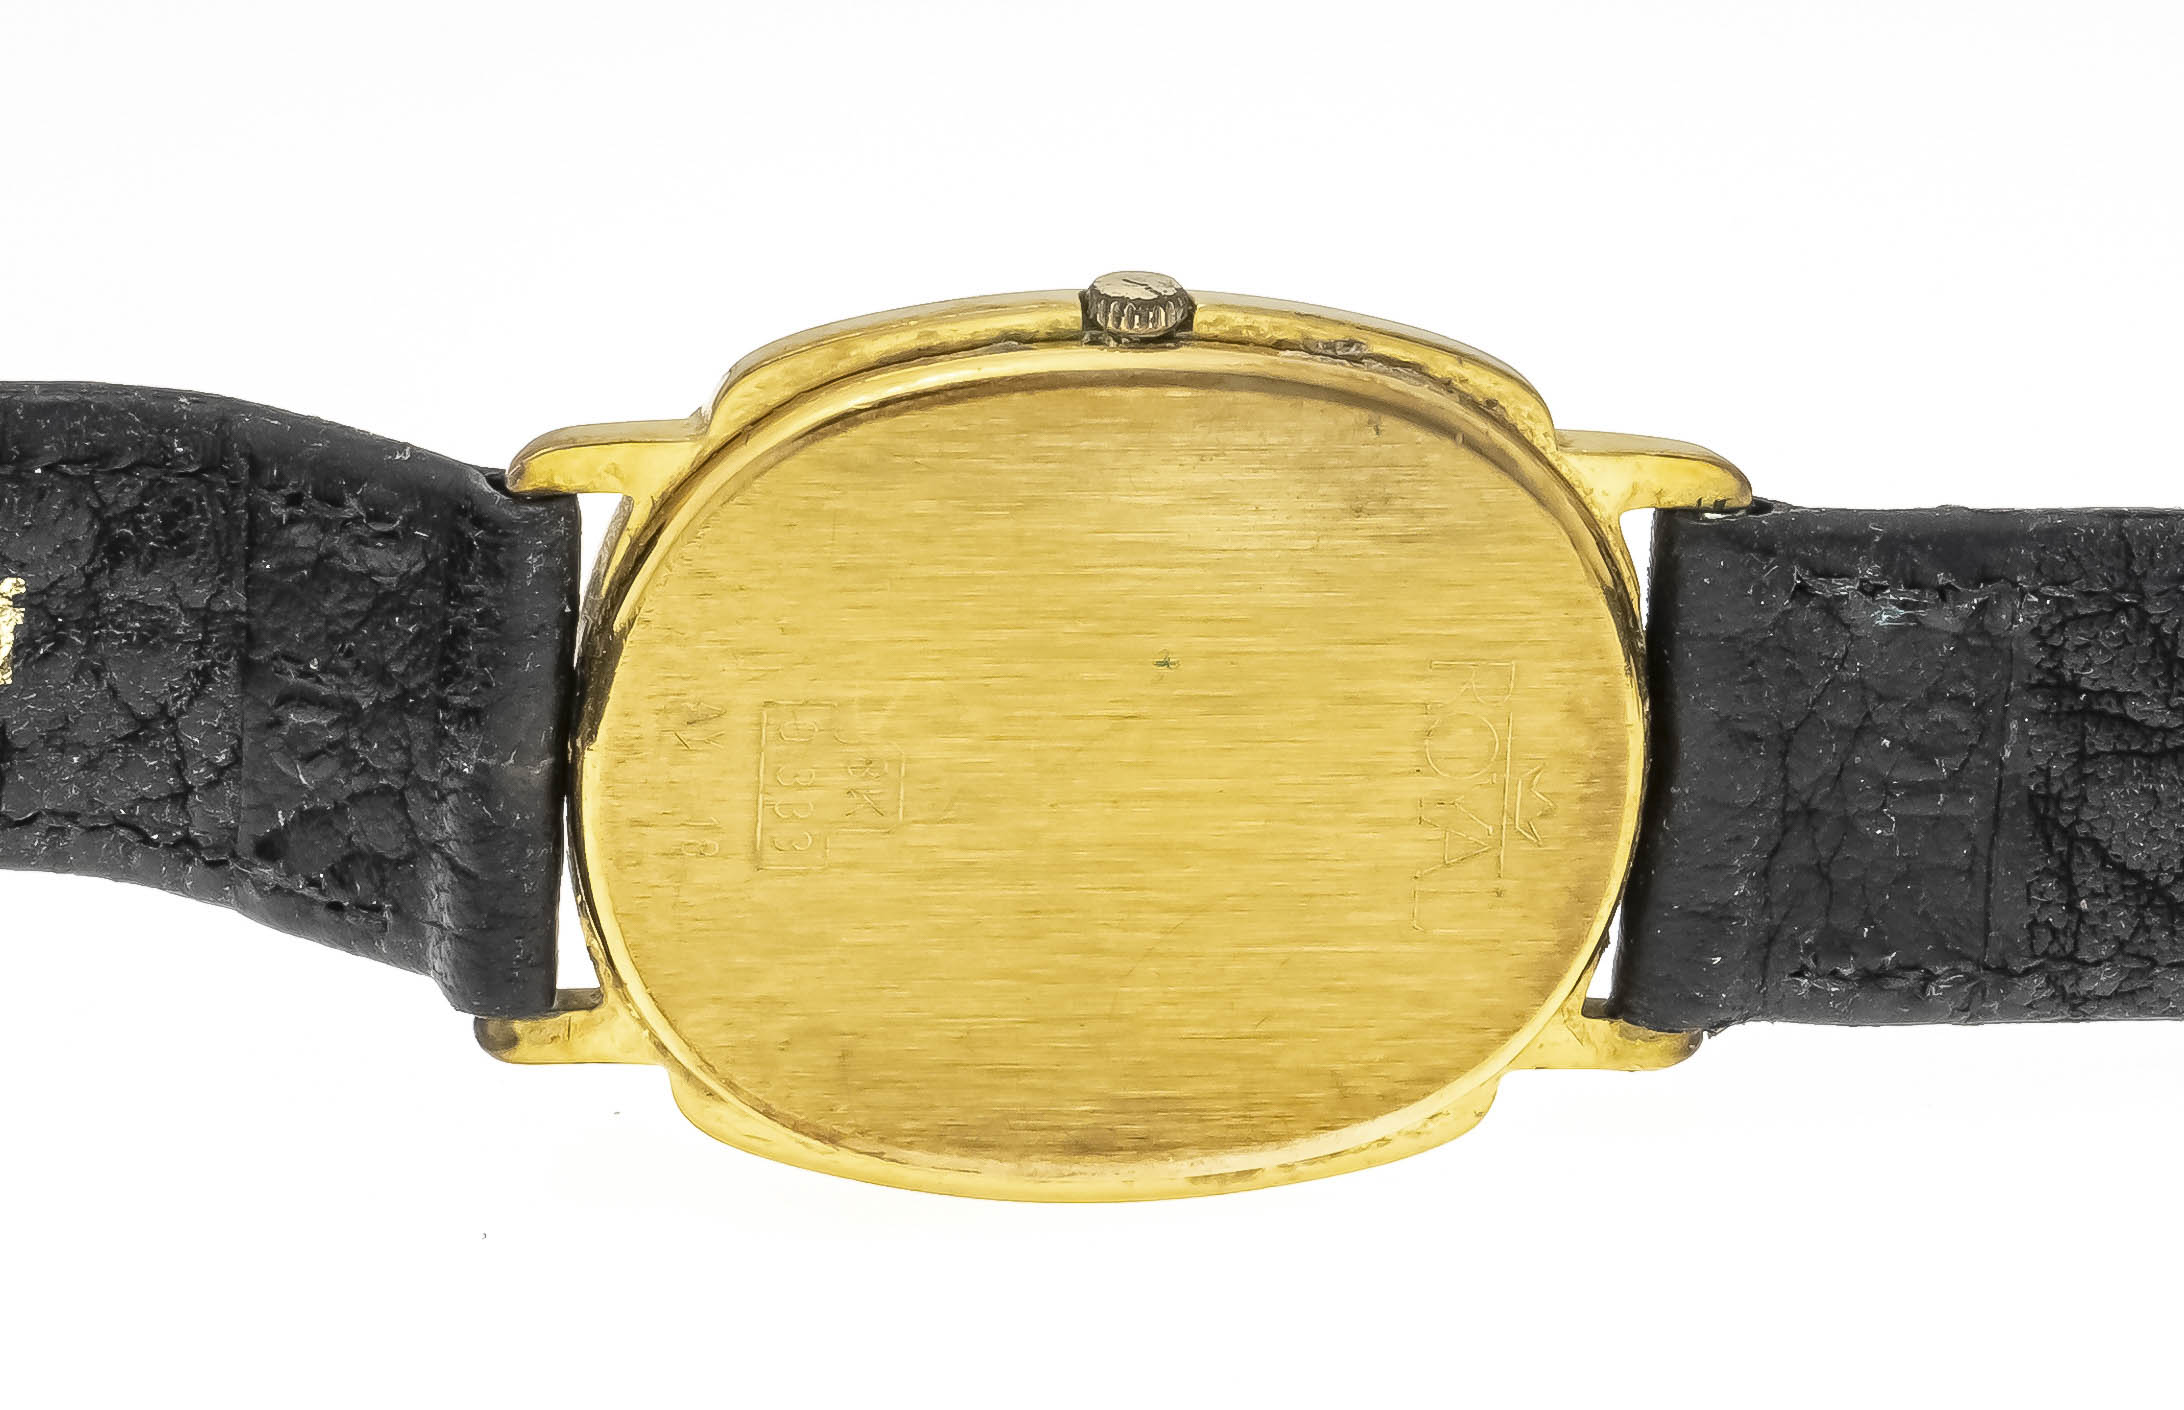 Royal men's quartz watch, 333/000 GG, oval case, gold dial with gilded roman numerals, bars and - Image 2 of 2